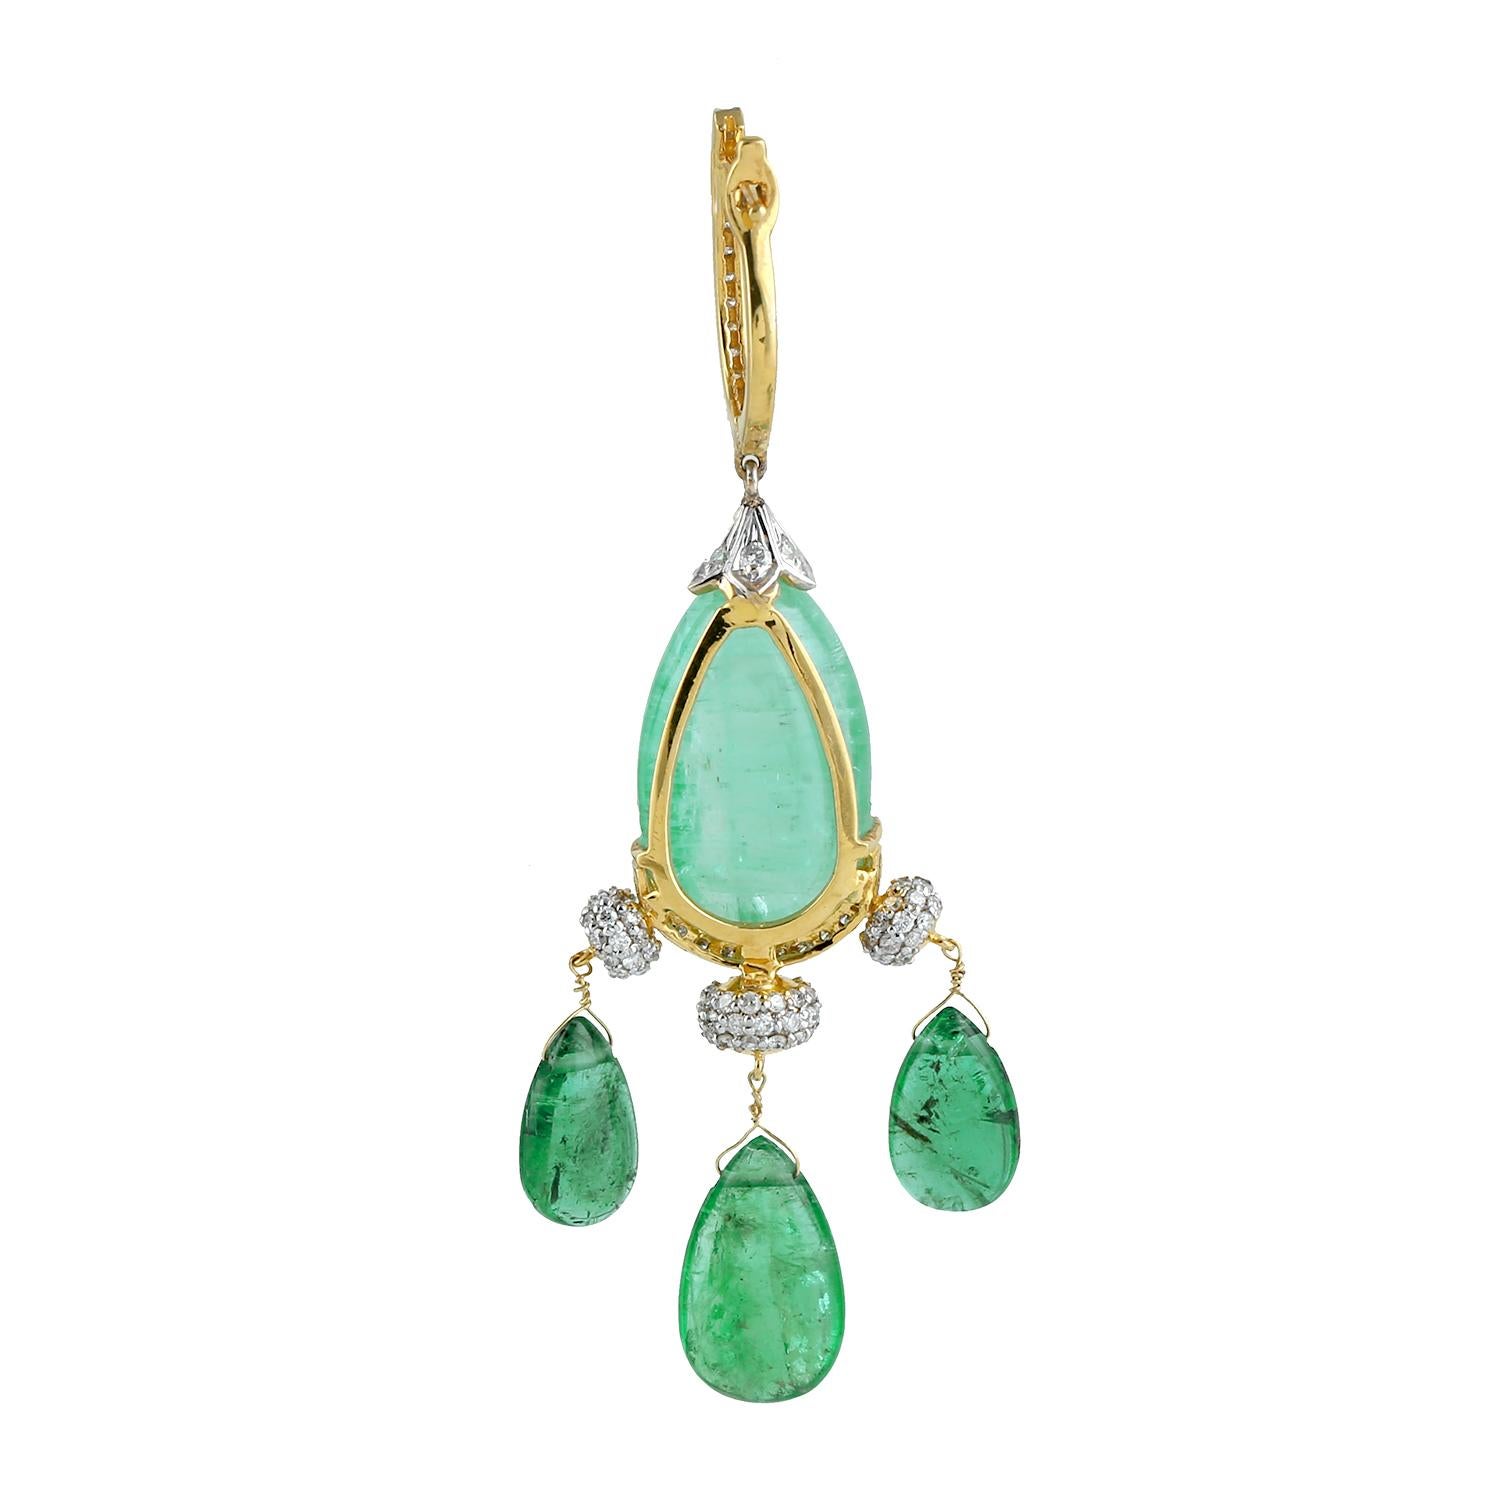 Cast from 18-karat gold.  These beautiful earrings are hand set with 58.18 carats emerald and 2.02 carats of sparkling diamonds.

FOLLOW  MEGHNA JEWELS storefront to view the latest collection & exclusive pieces.  Meghna Jewels is proudly rated as a